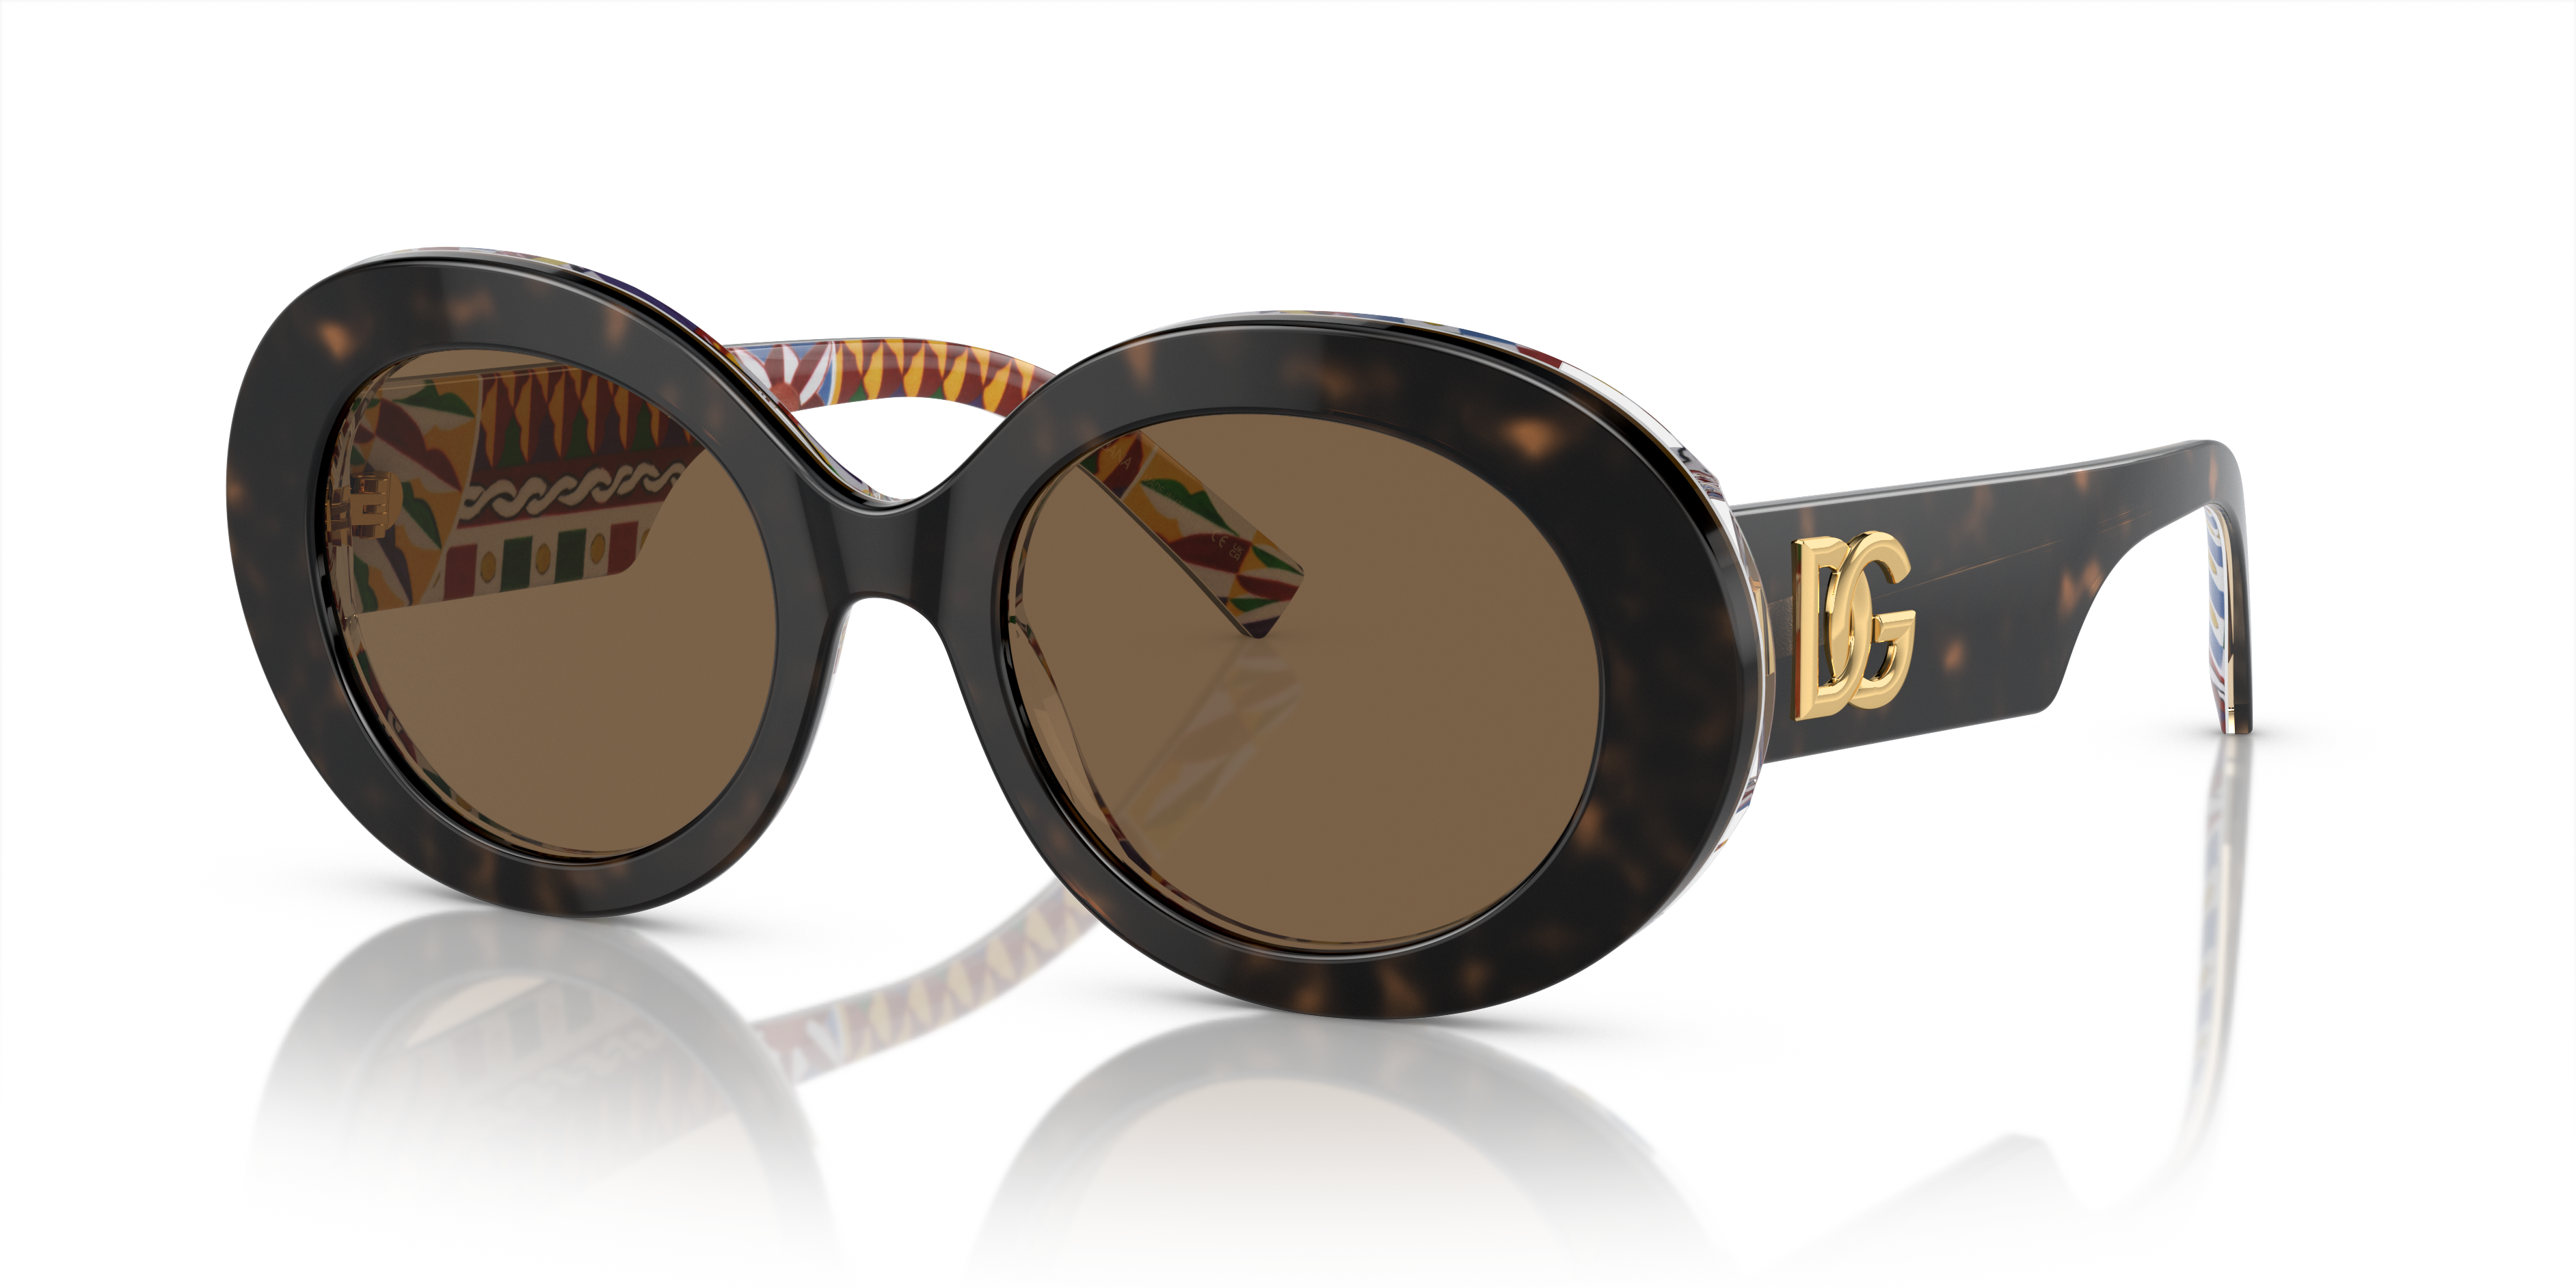 [products.image.angle_left01] DOLCE & GABBANA DG4448 321773